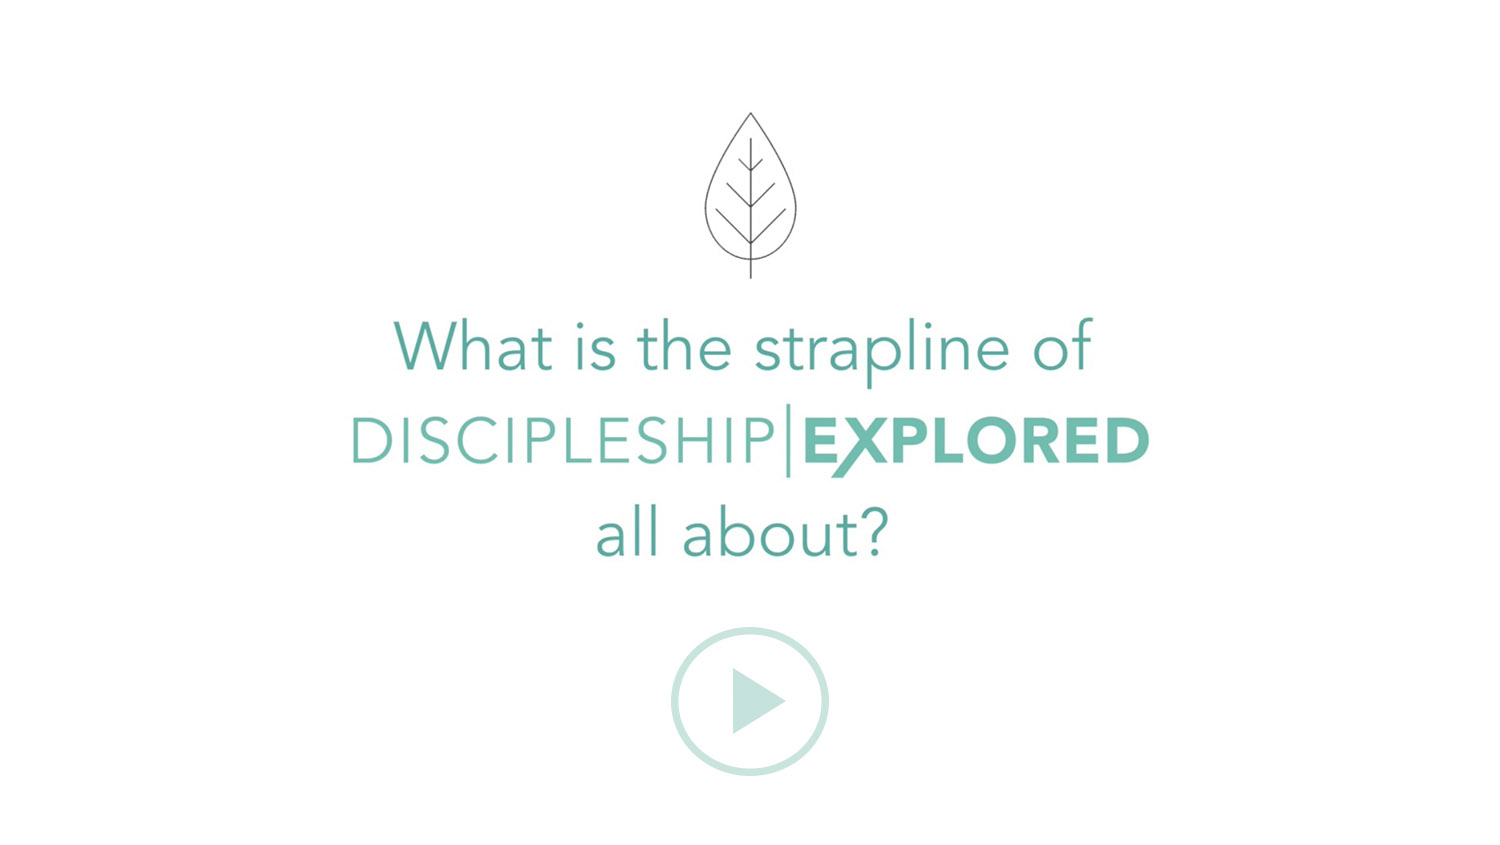 Question 4*What is the strapline of Discipleship Explored all about?